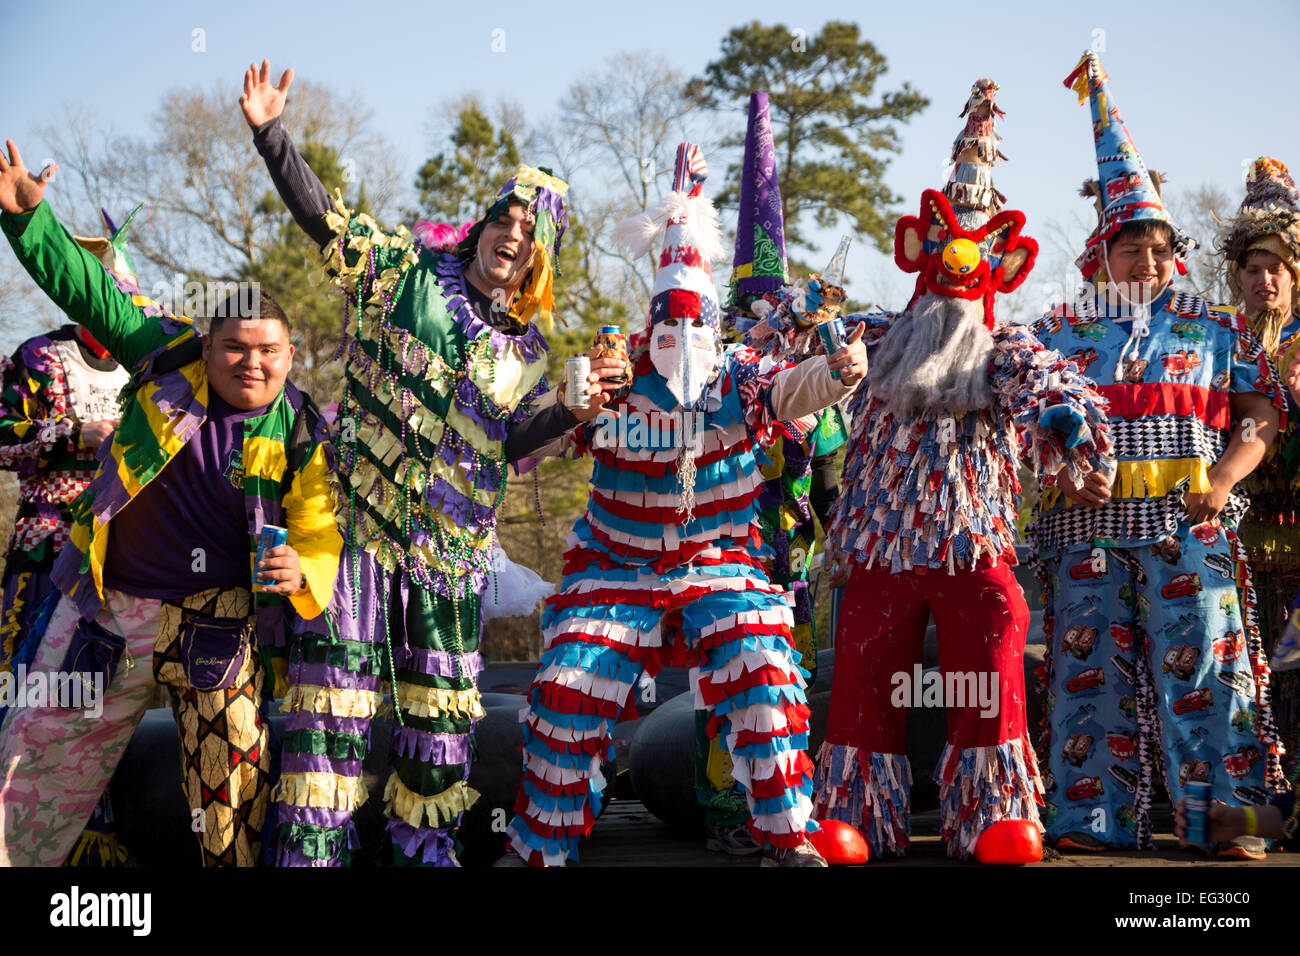 Wearing traditional Cajun Mardi Gras costume and mask participants make their way through the Coushatta Reservation at the start of the Courir de Mardi Gras February 14, 2015 in Elton, Louisiana. Revelers